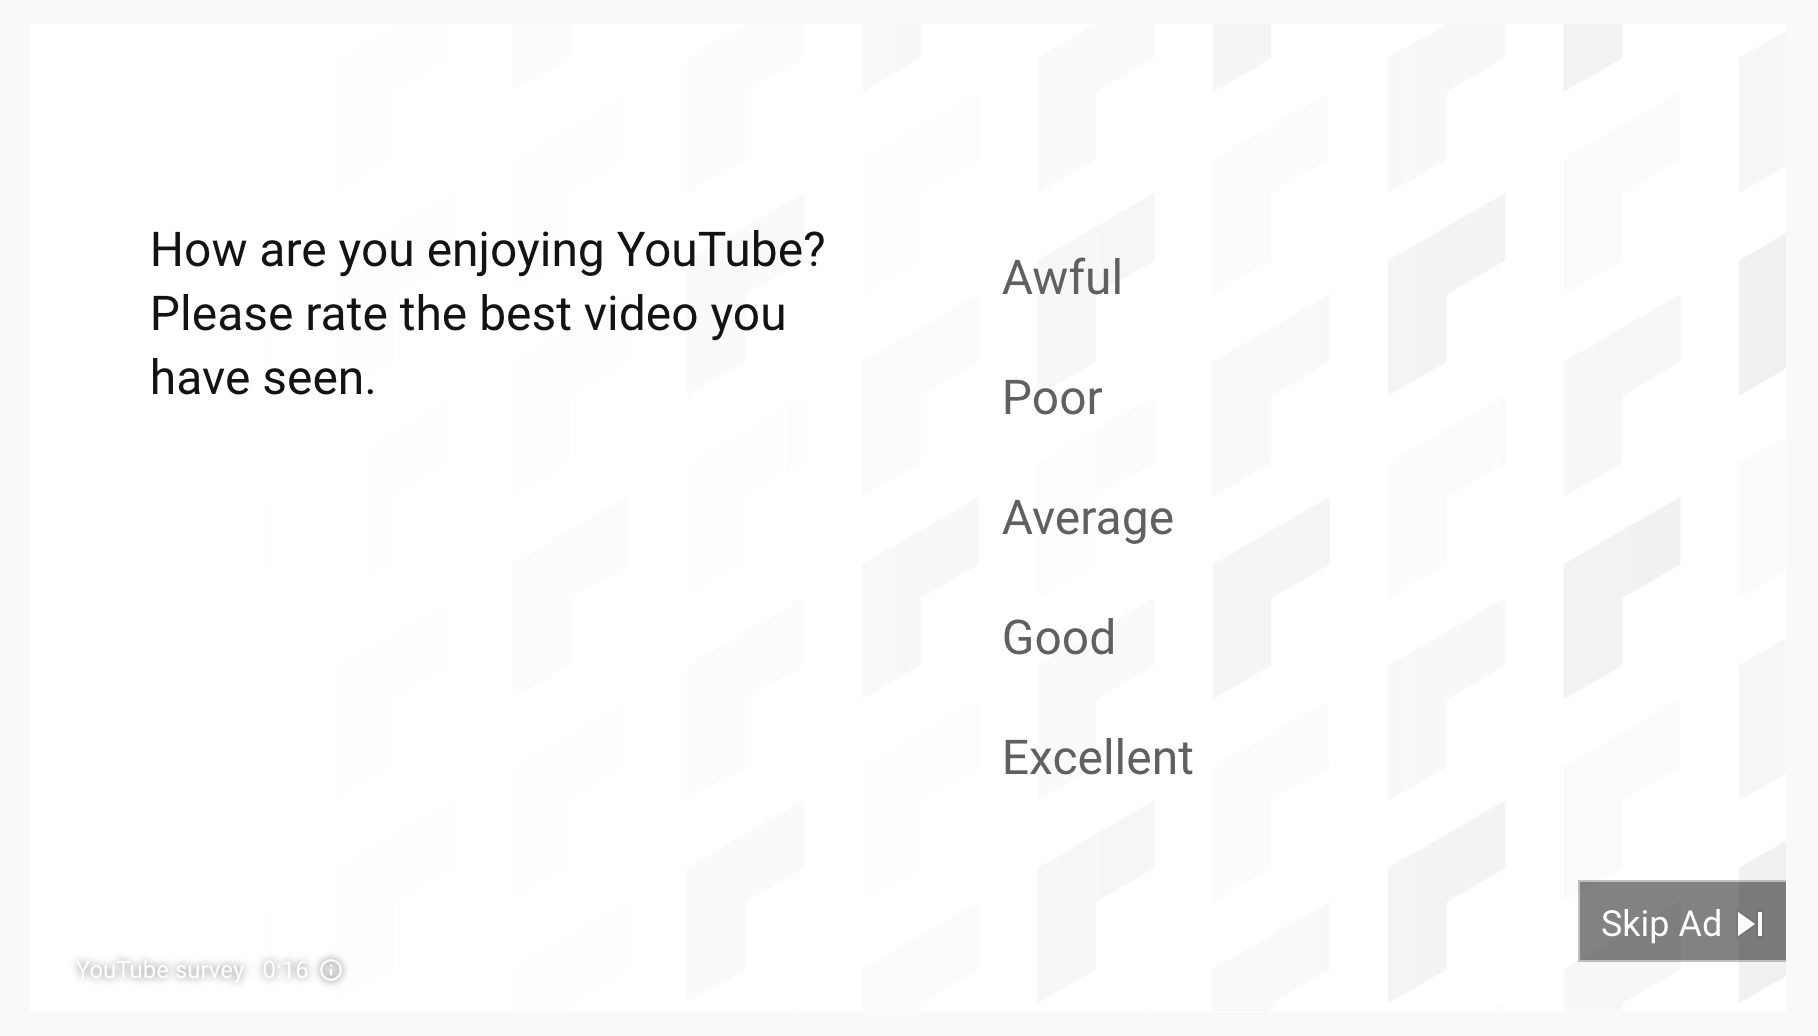 Youtube asking to rate regarding best video watching on scale of awful to excellent.